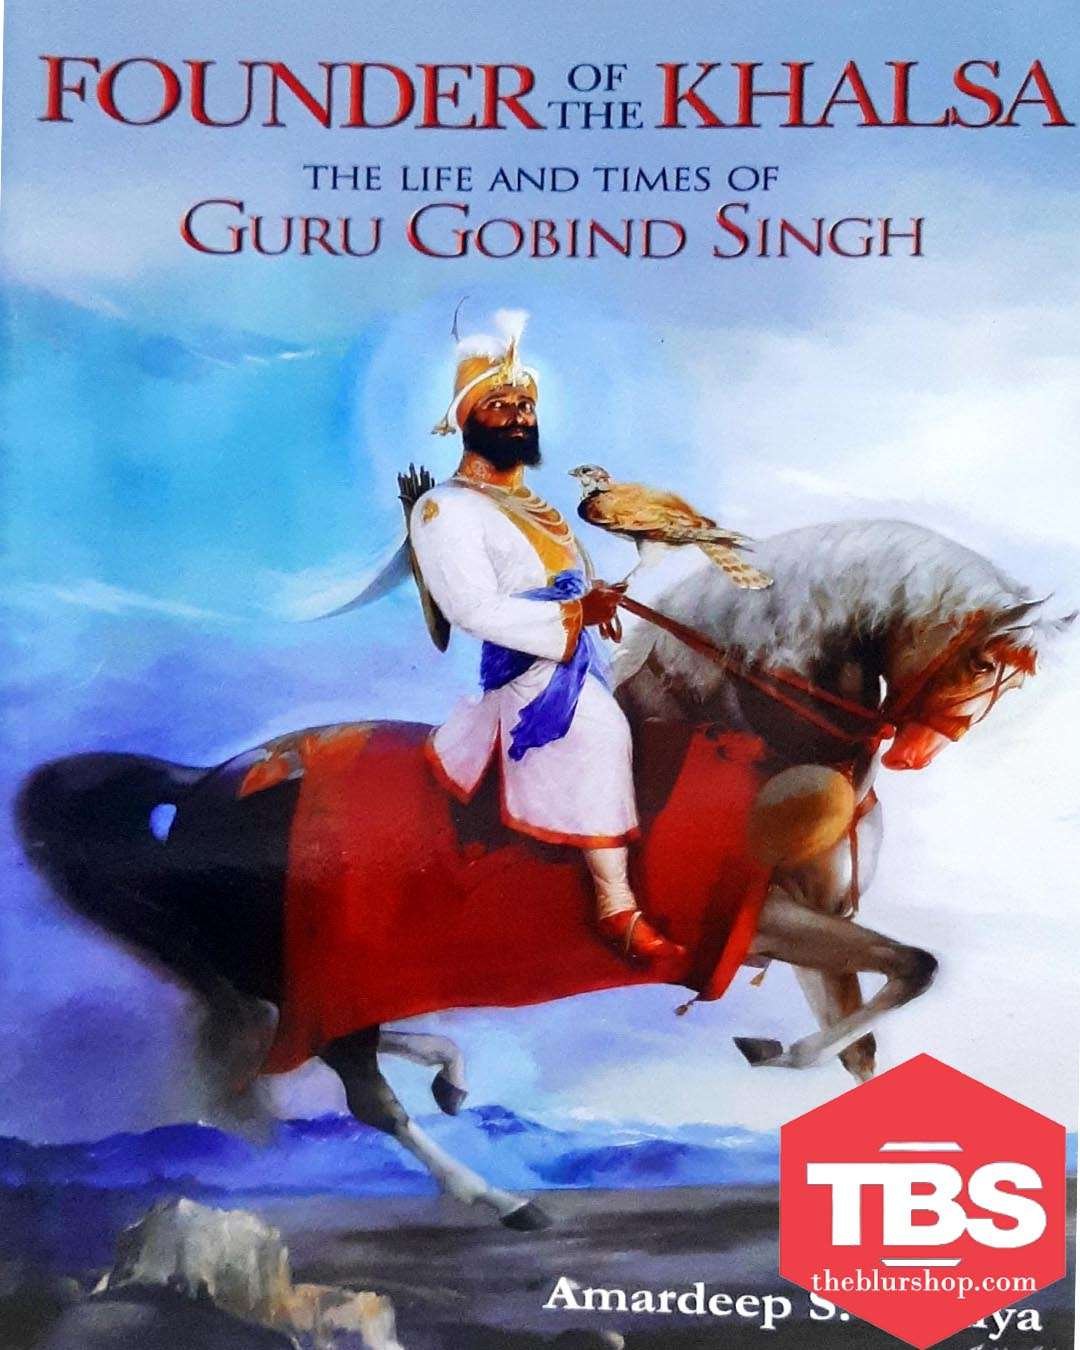 Founder of The Khalsa: The Life And Times of Guru Gobind Singh